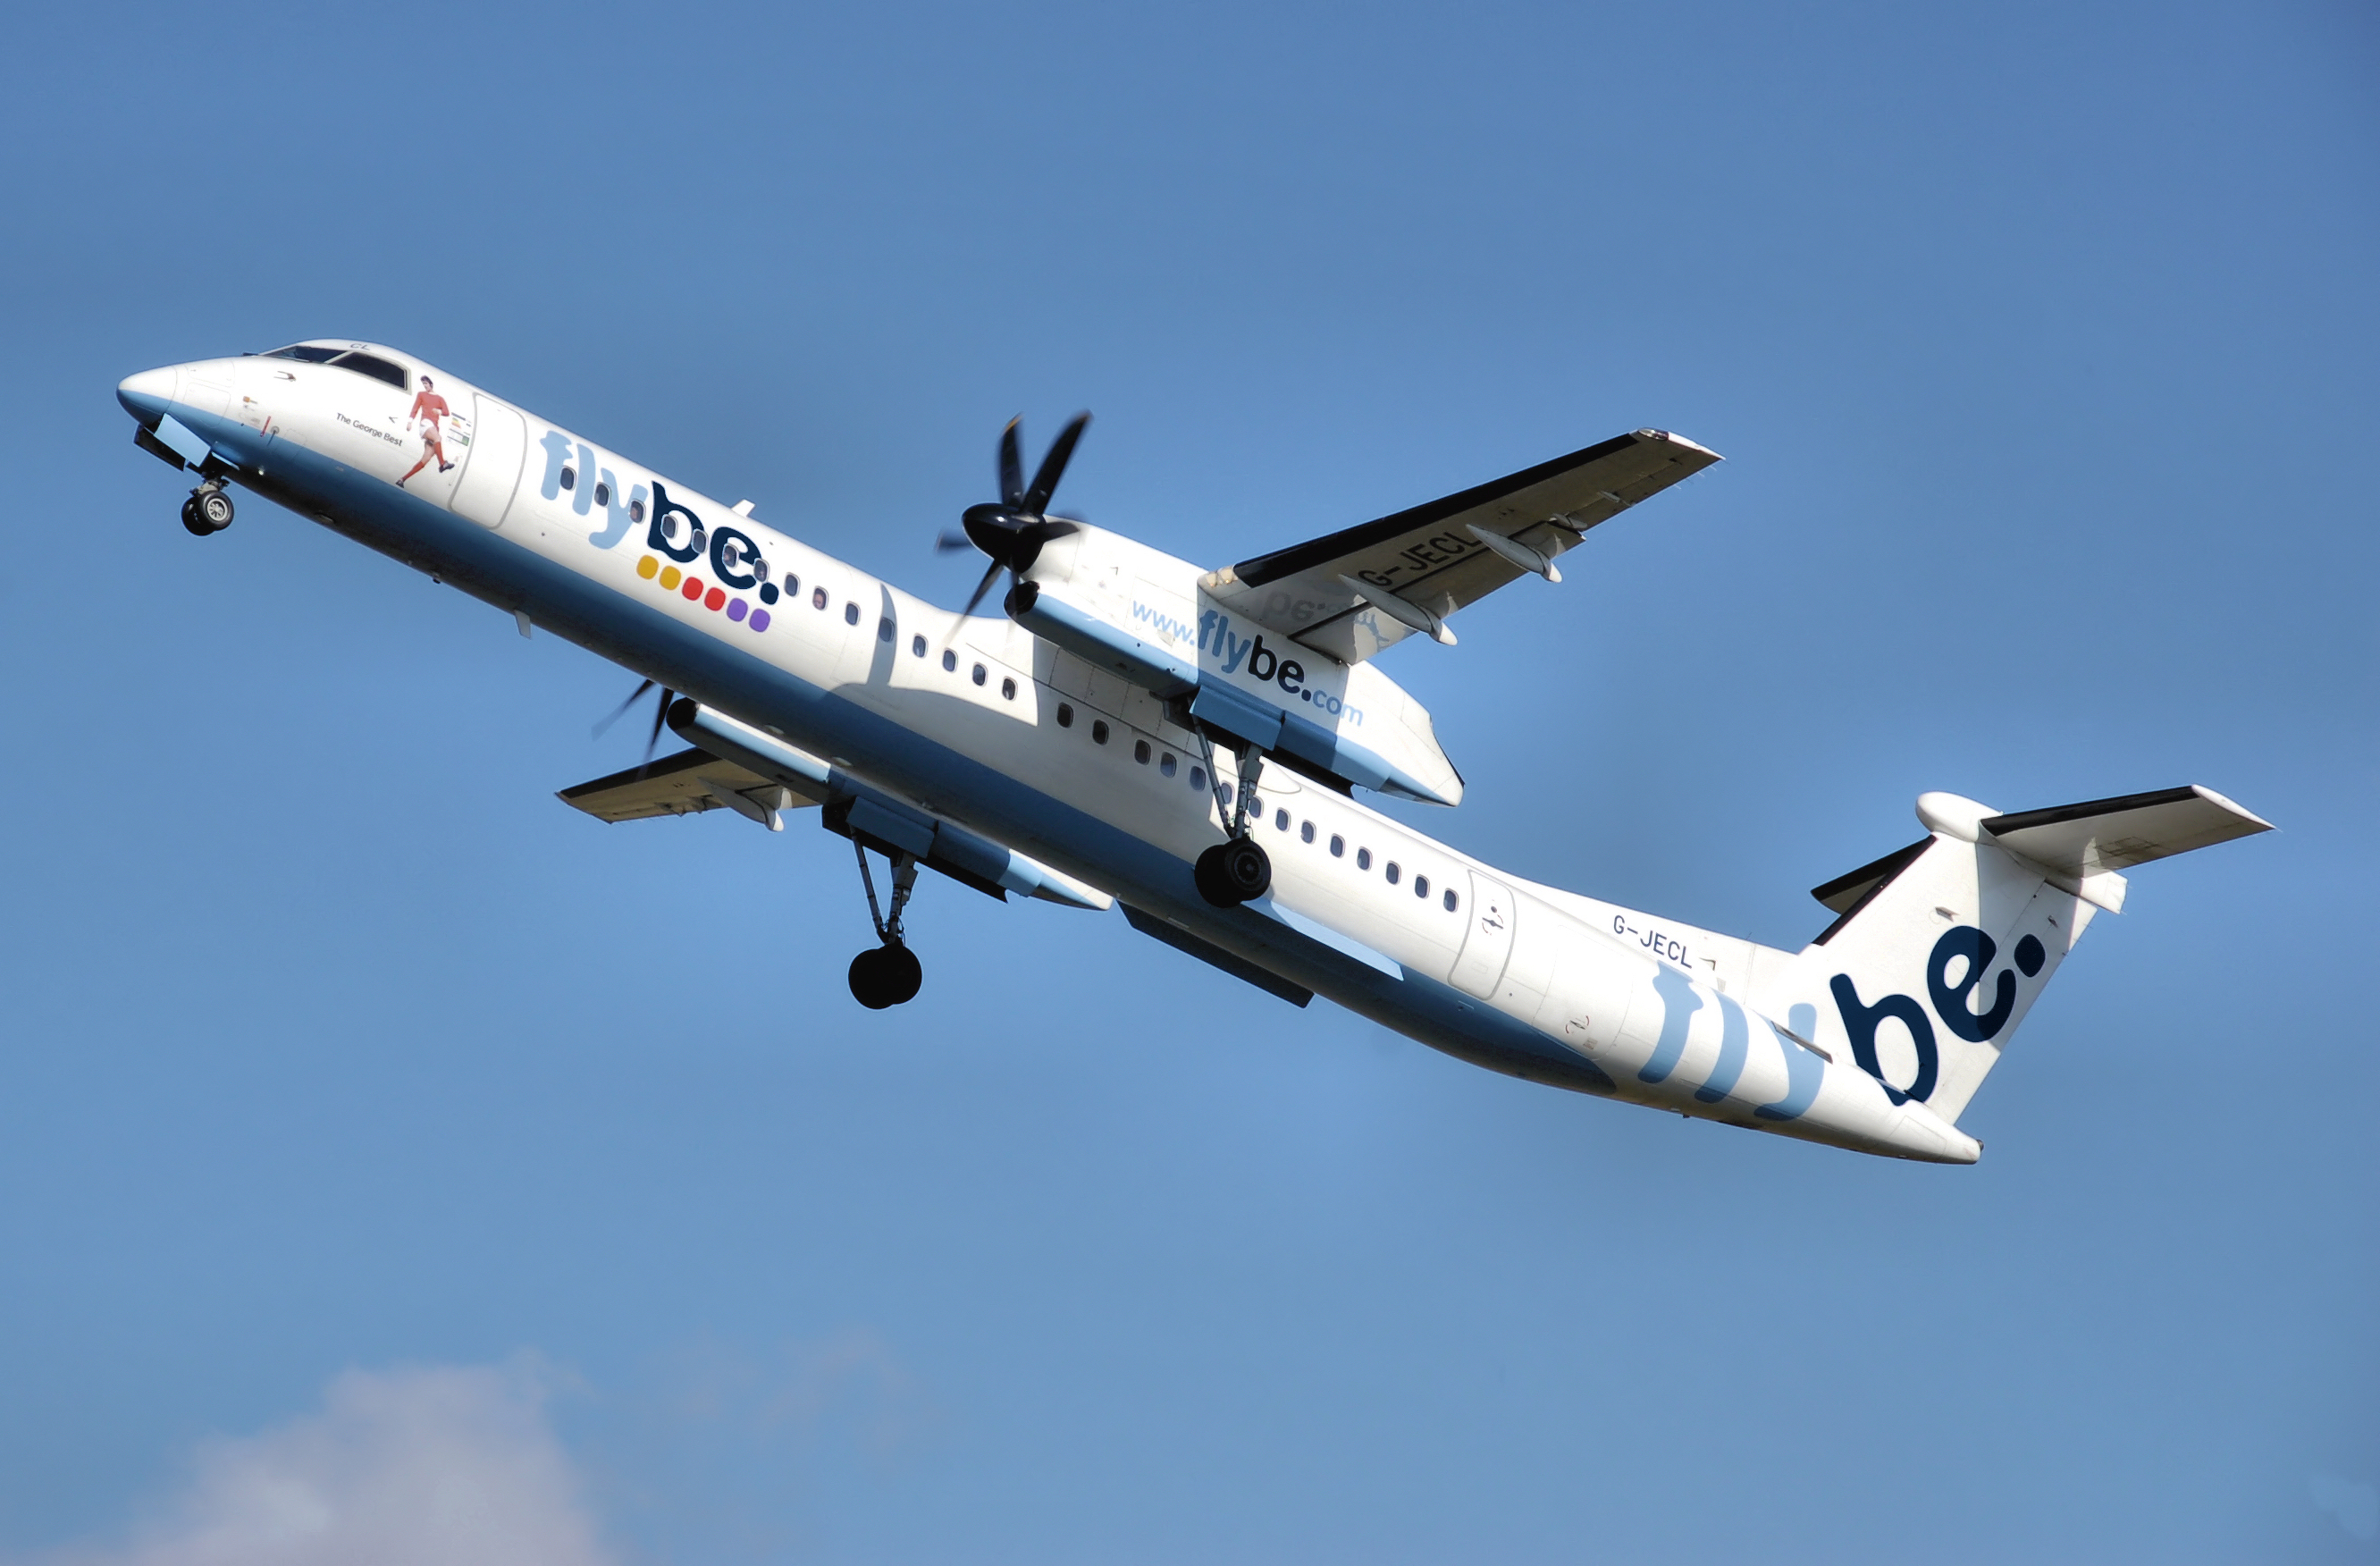 Flybe dash8 g-jecl takeoff manchester arp